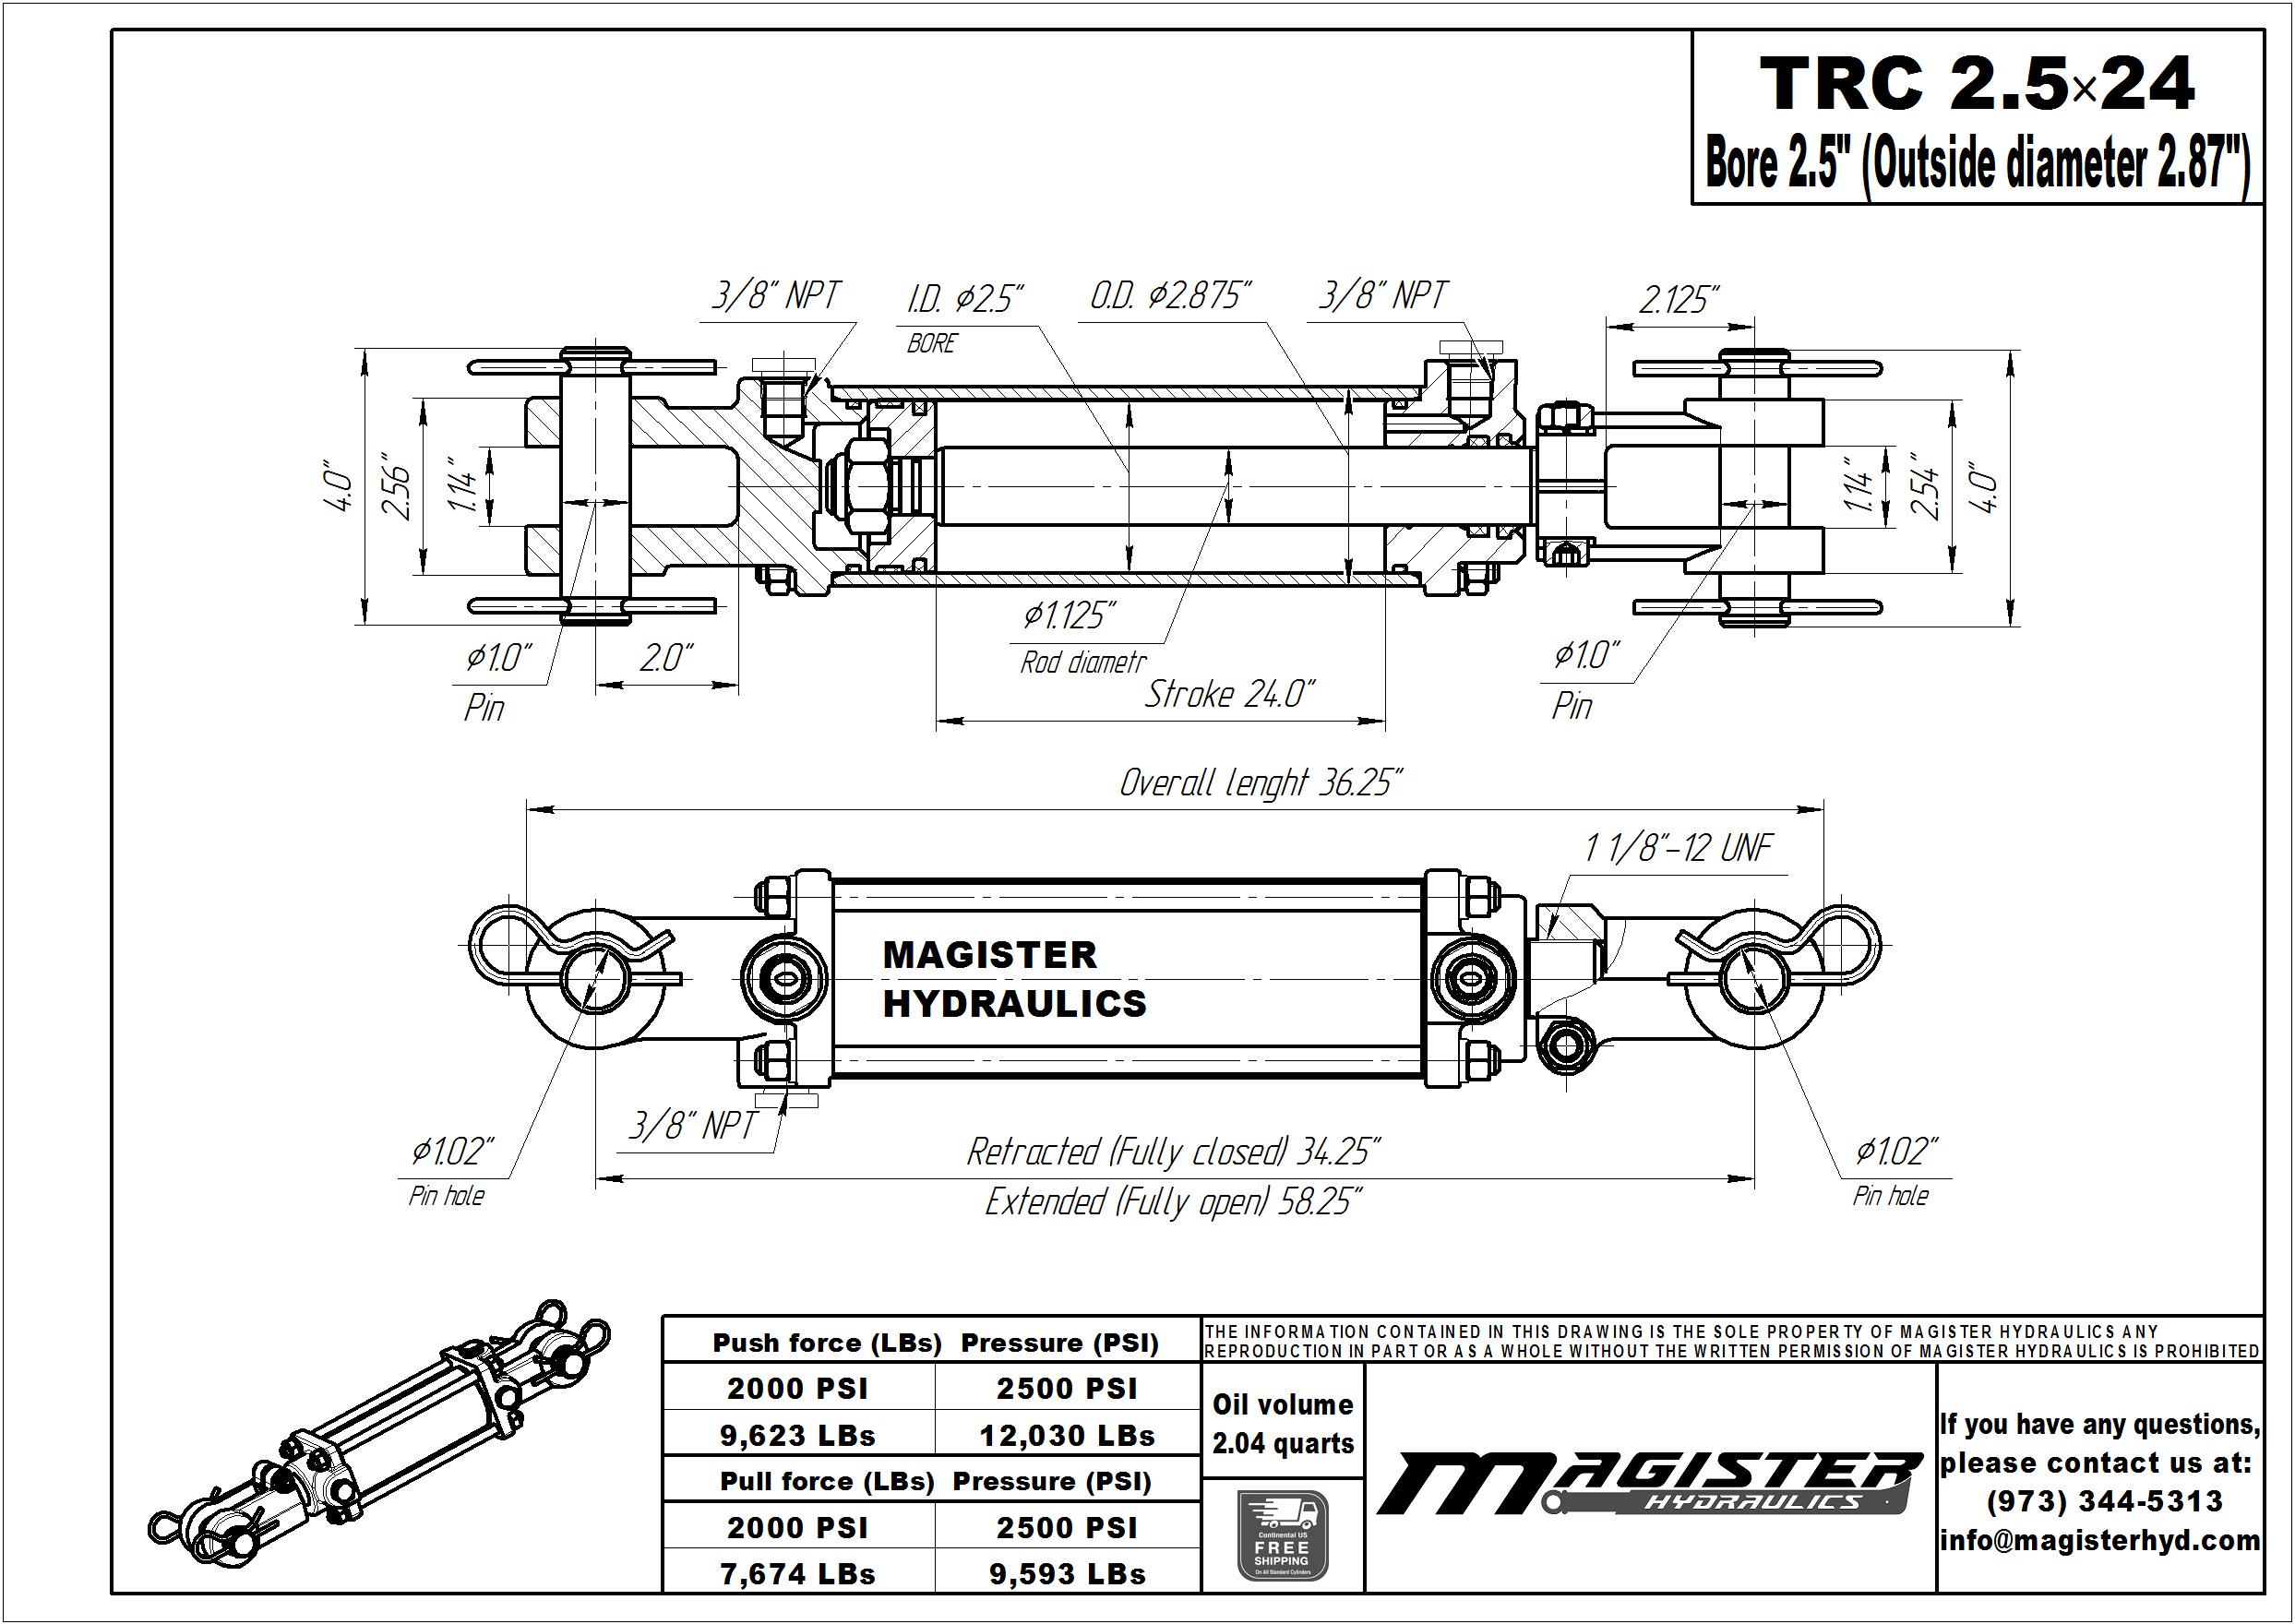 2.5 bore x 24 stroke hydraulic cylinder, tie rod double acting cylinder | Magister Hydraulics